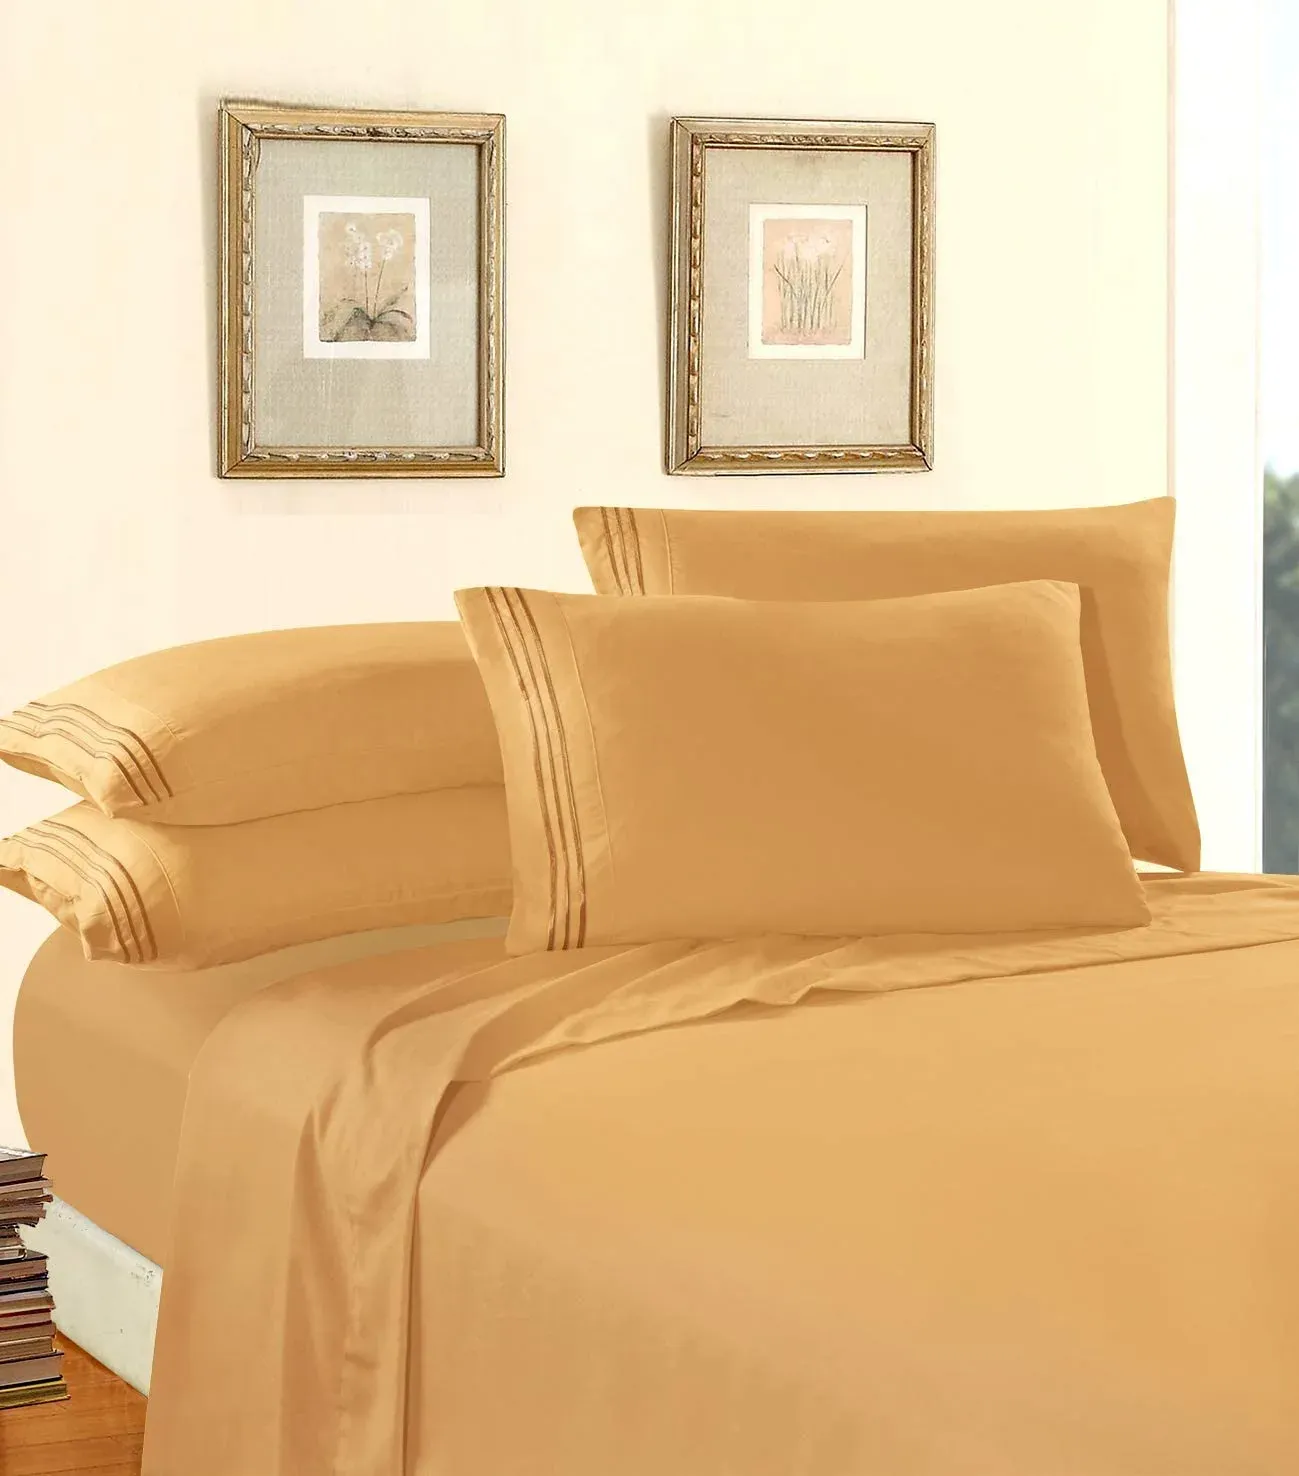 Luxury Soft 1500 Thread Count Egyptian 4 pcs Premium Quality Wrinkle Resistant Coziest Bedding Set Deep Pockets Queen